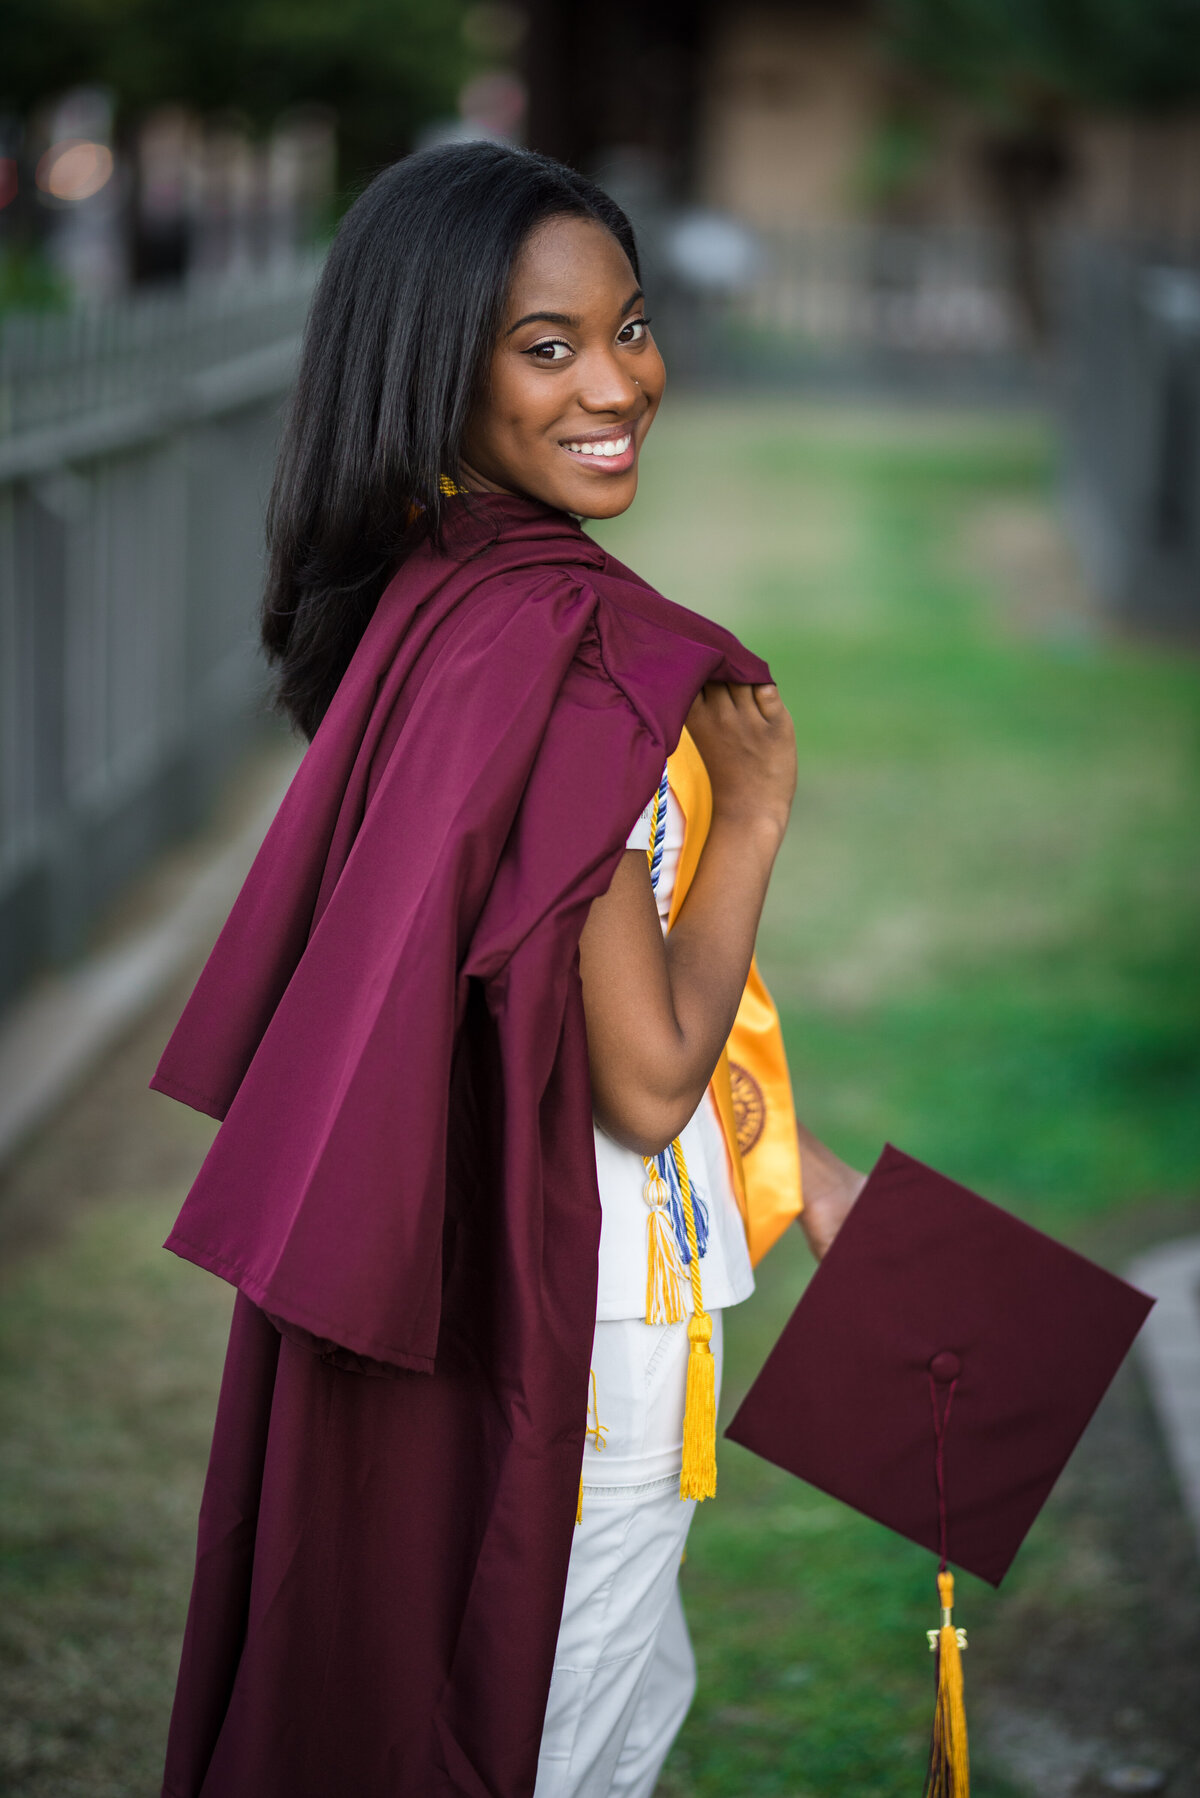 African American girl with cap and gown